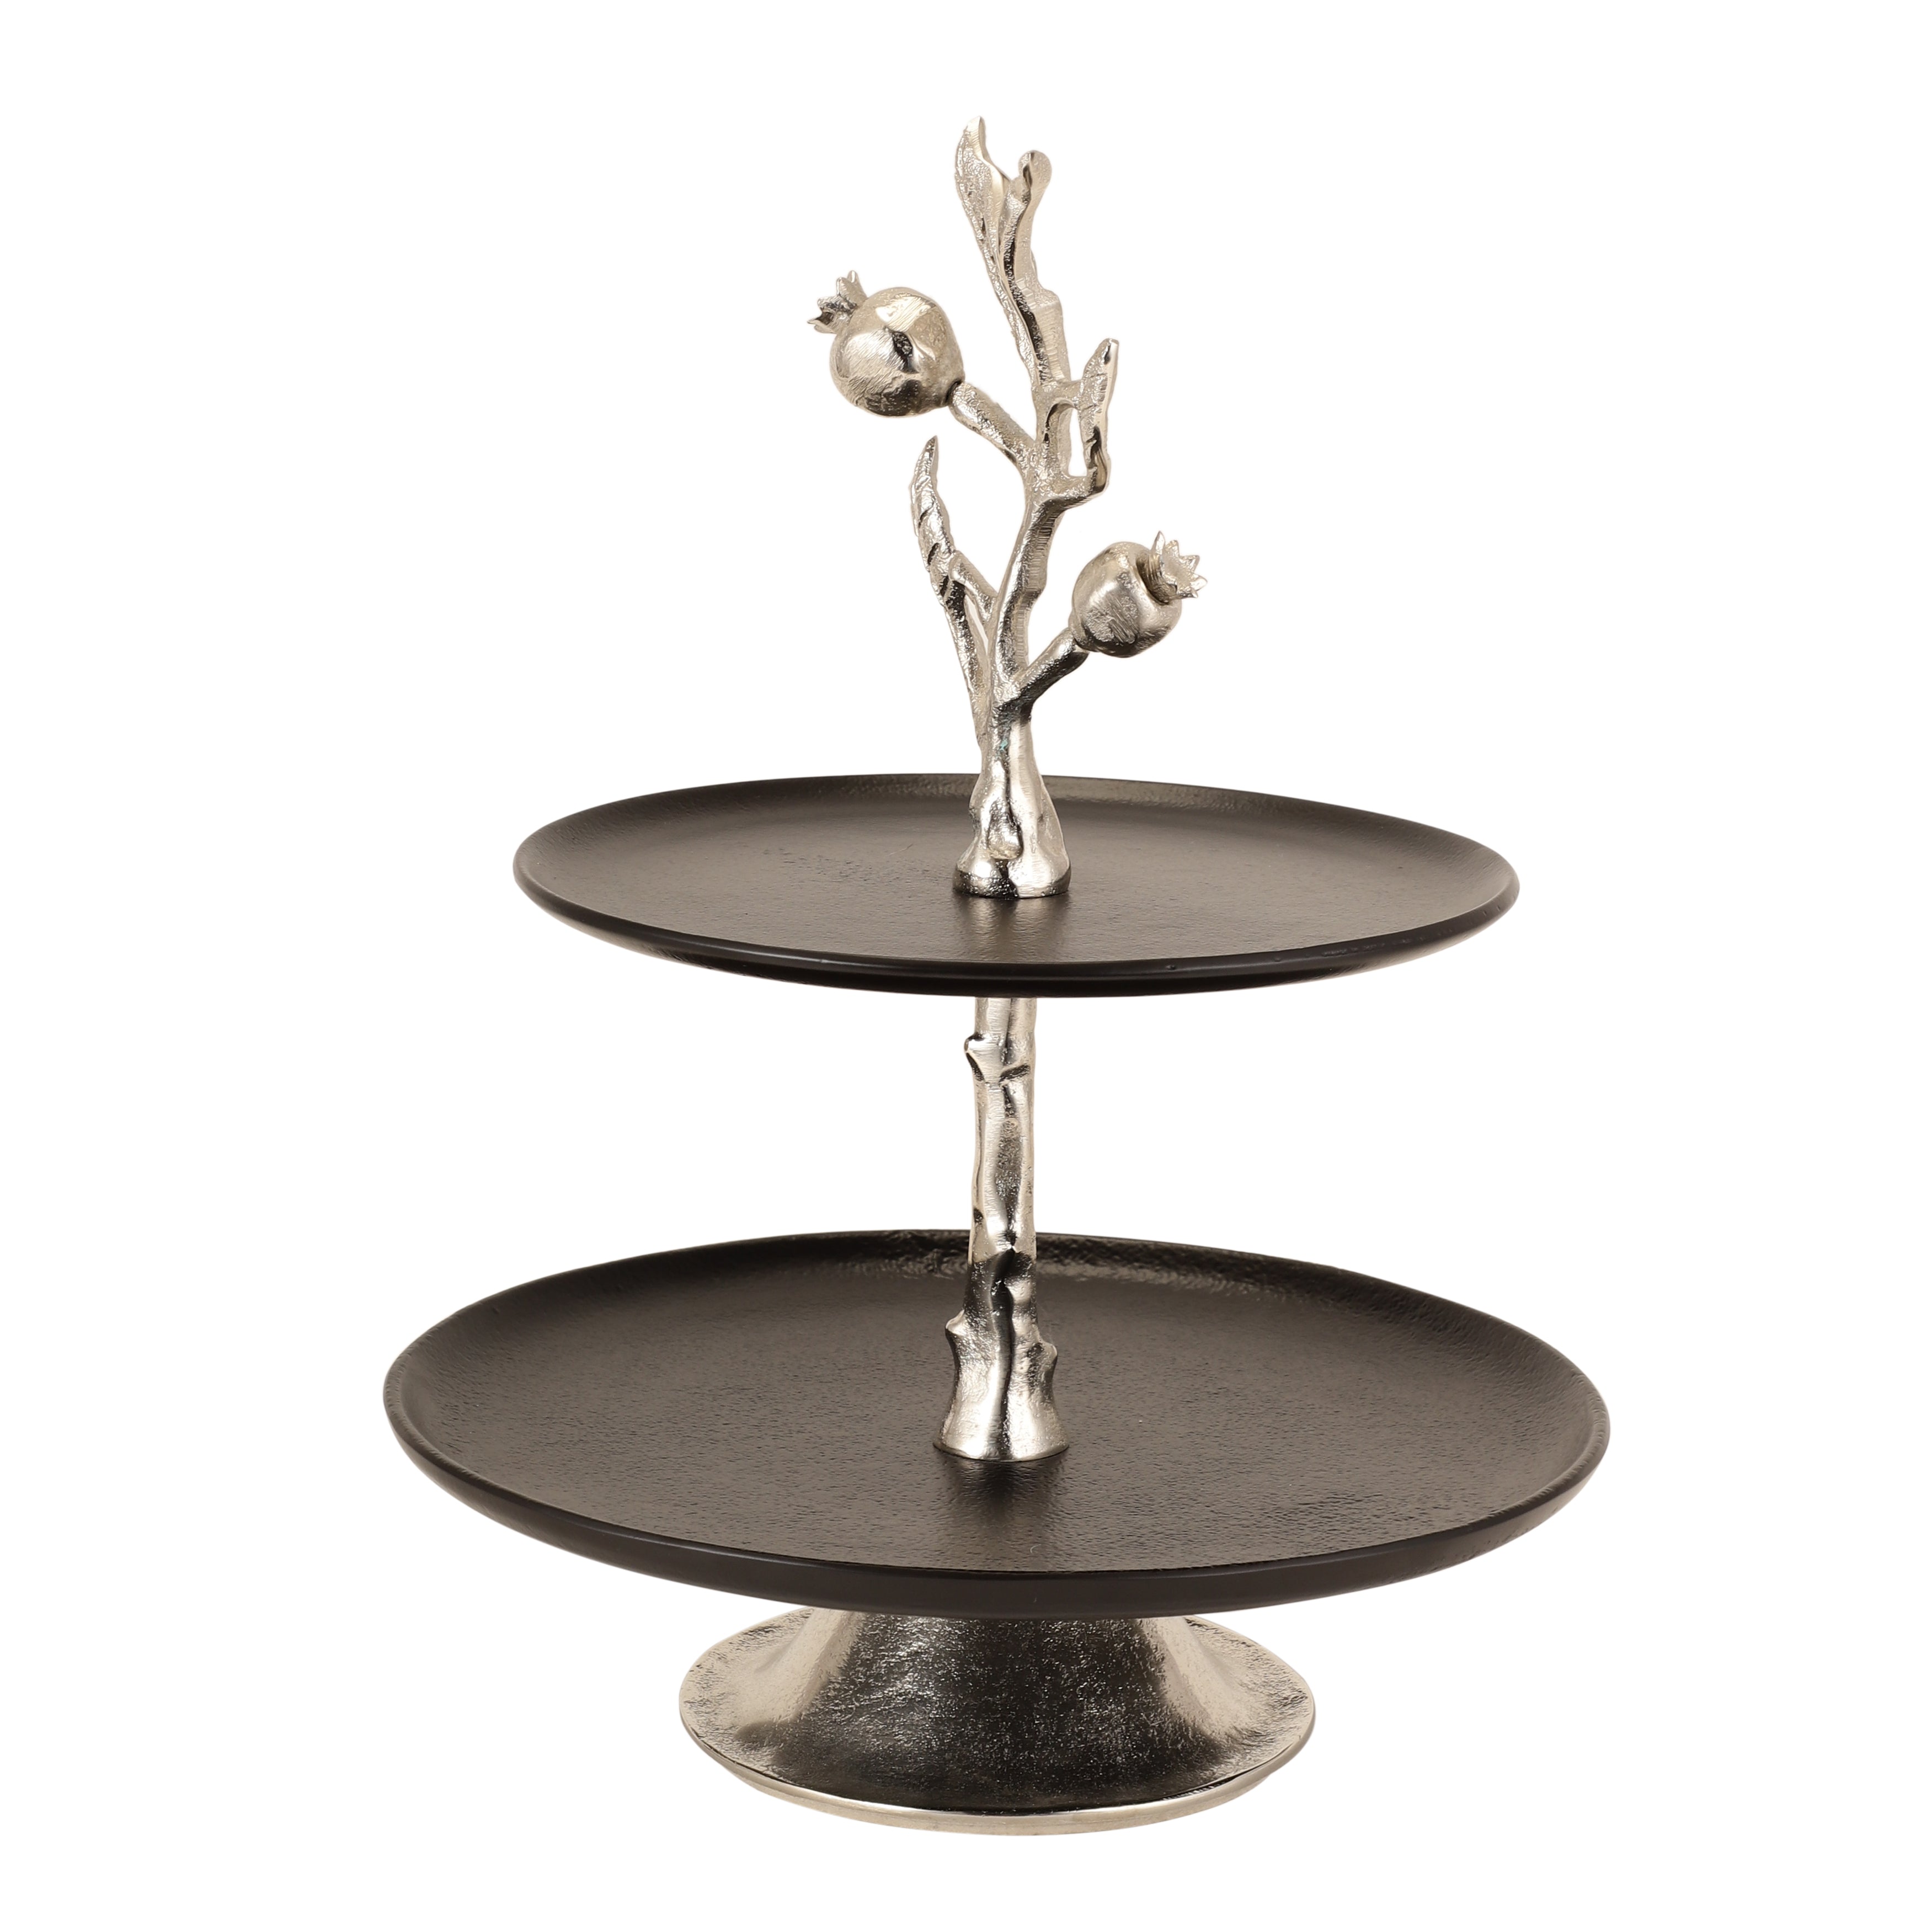 Pomegranate Metal Two layer cake stand in Silver Black